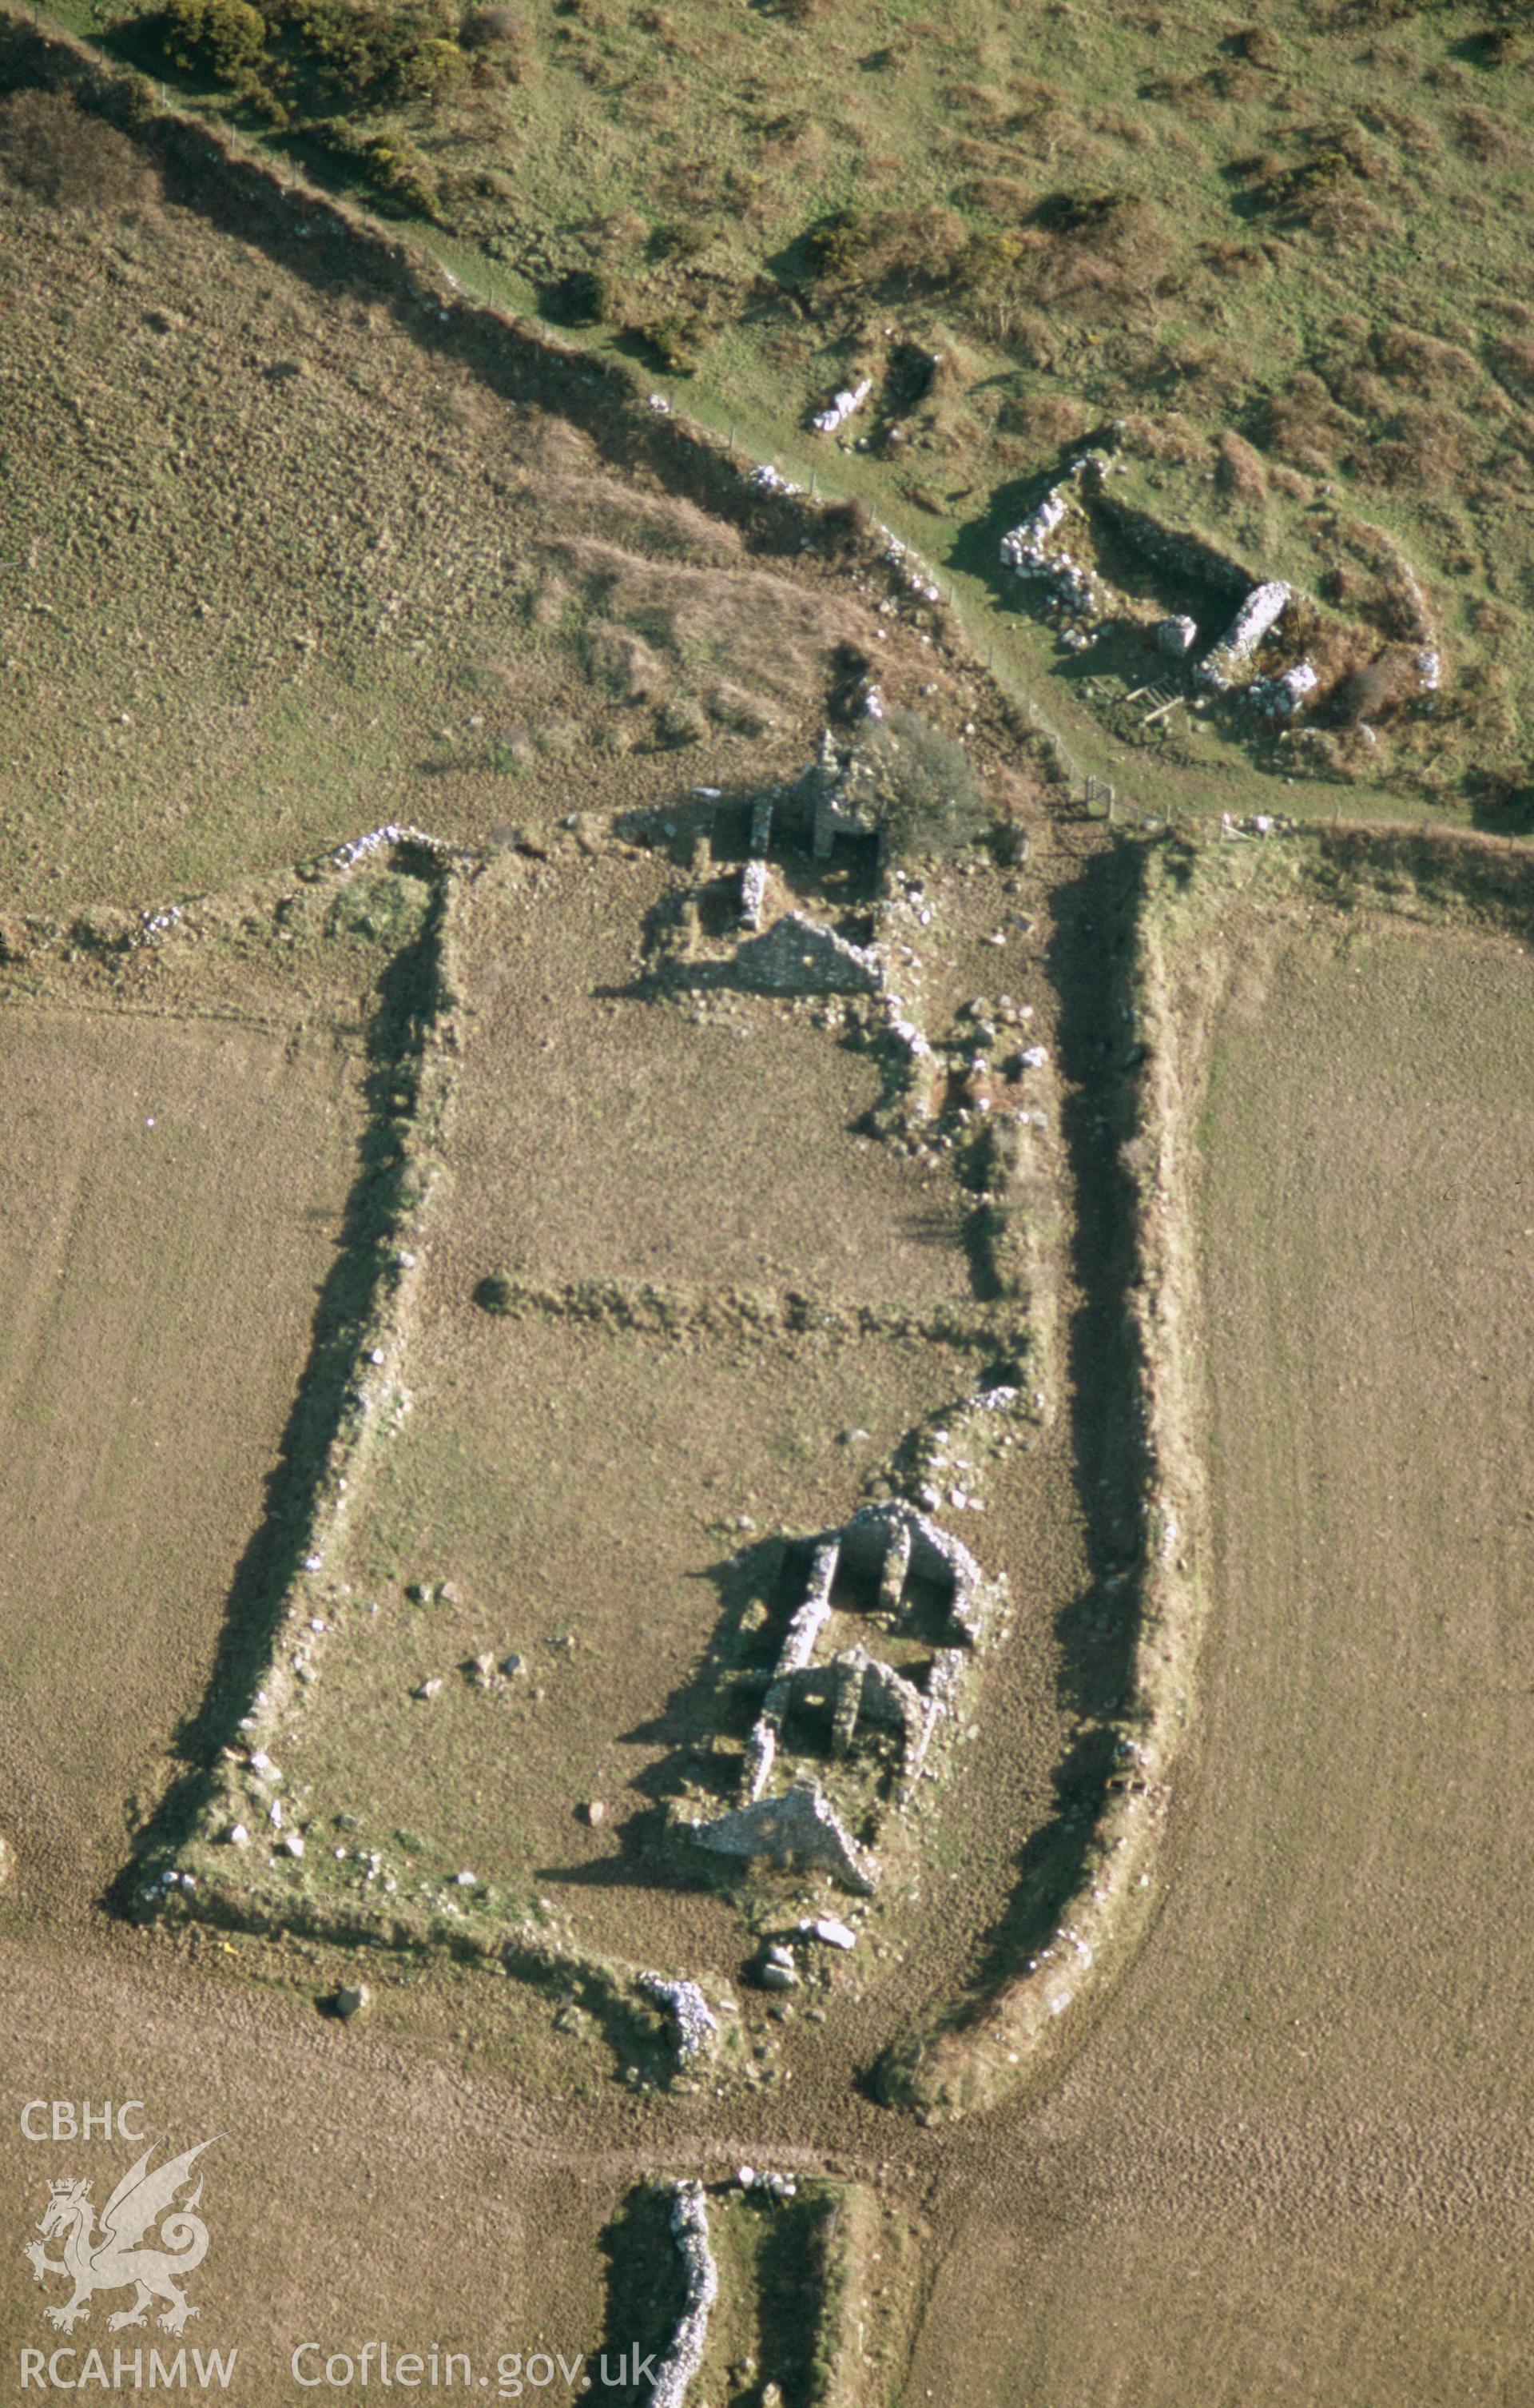 Slide of RCAHMW colour oblique aerial photograph of Maes y Mynydd Farmstead St Davids,  taken by Toby Driver, 2002.